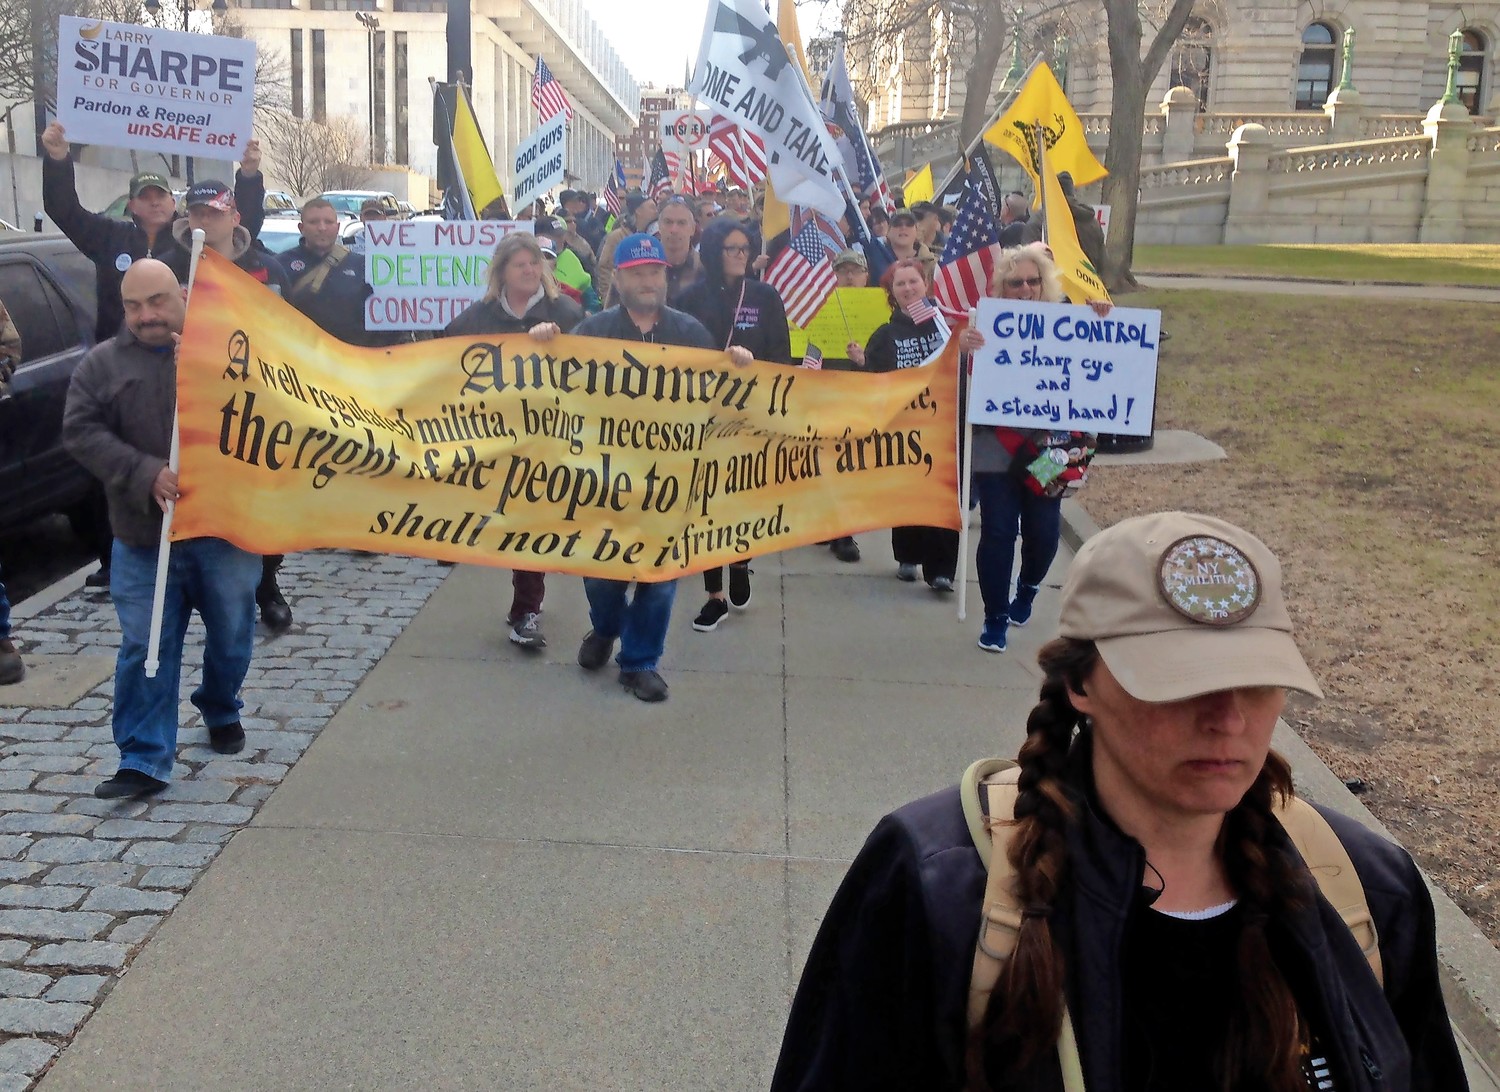 An estimated 300 to 400 gun-rights advocates rallied in front of the State Capitol in Albany last Saturday. Many protesters interviewed by the Herald said the AR-15 assault rifle must remain legal across the country.